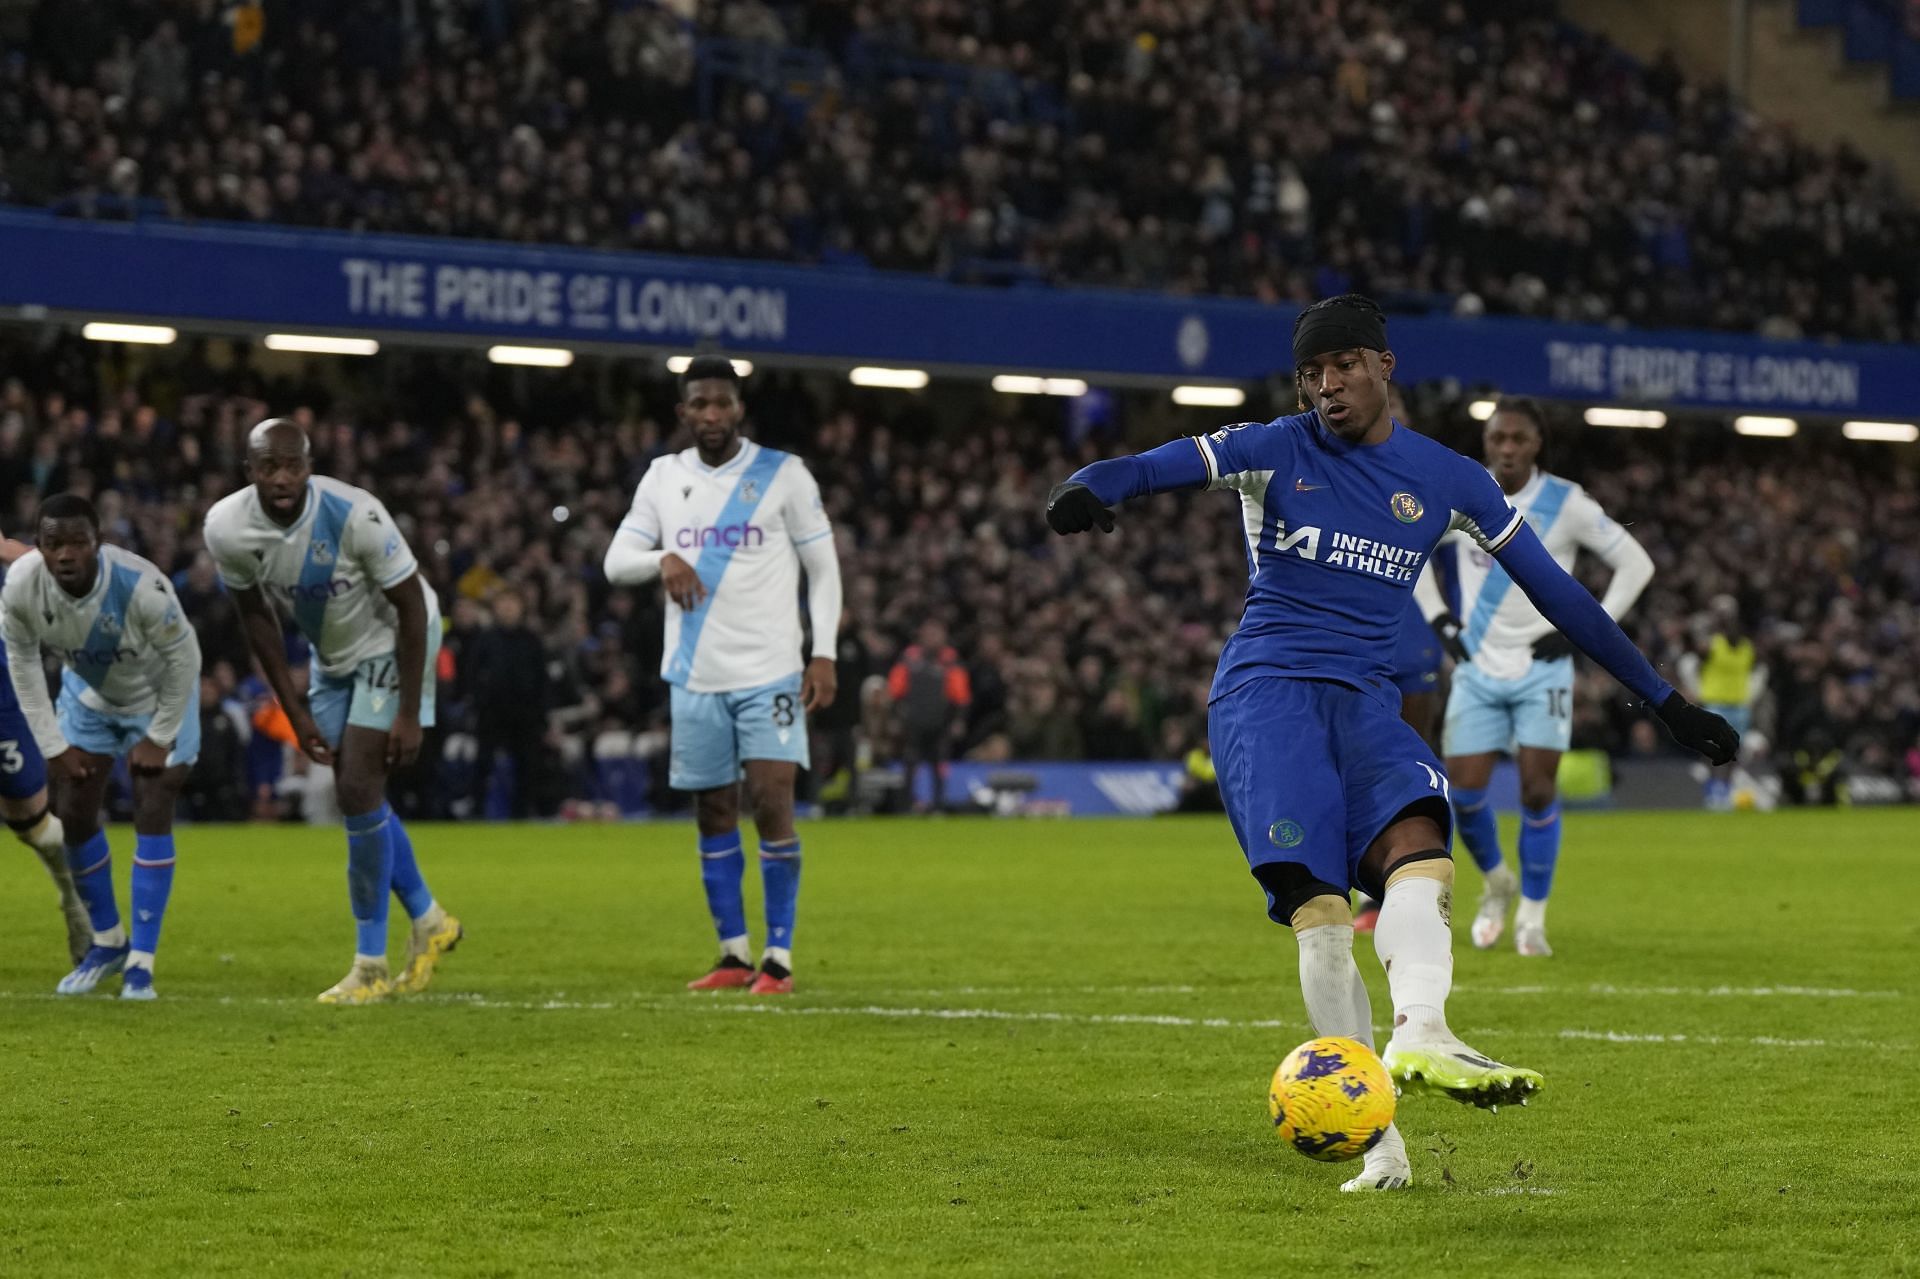 Madueke silenced critics with a late winner against Palace.